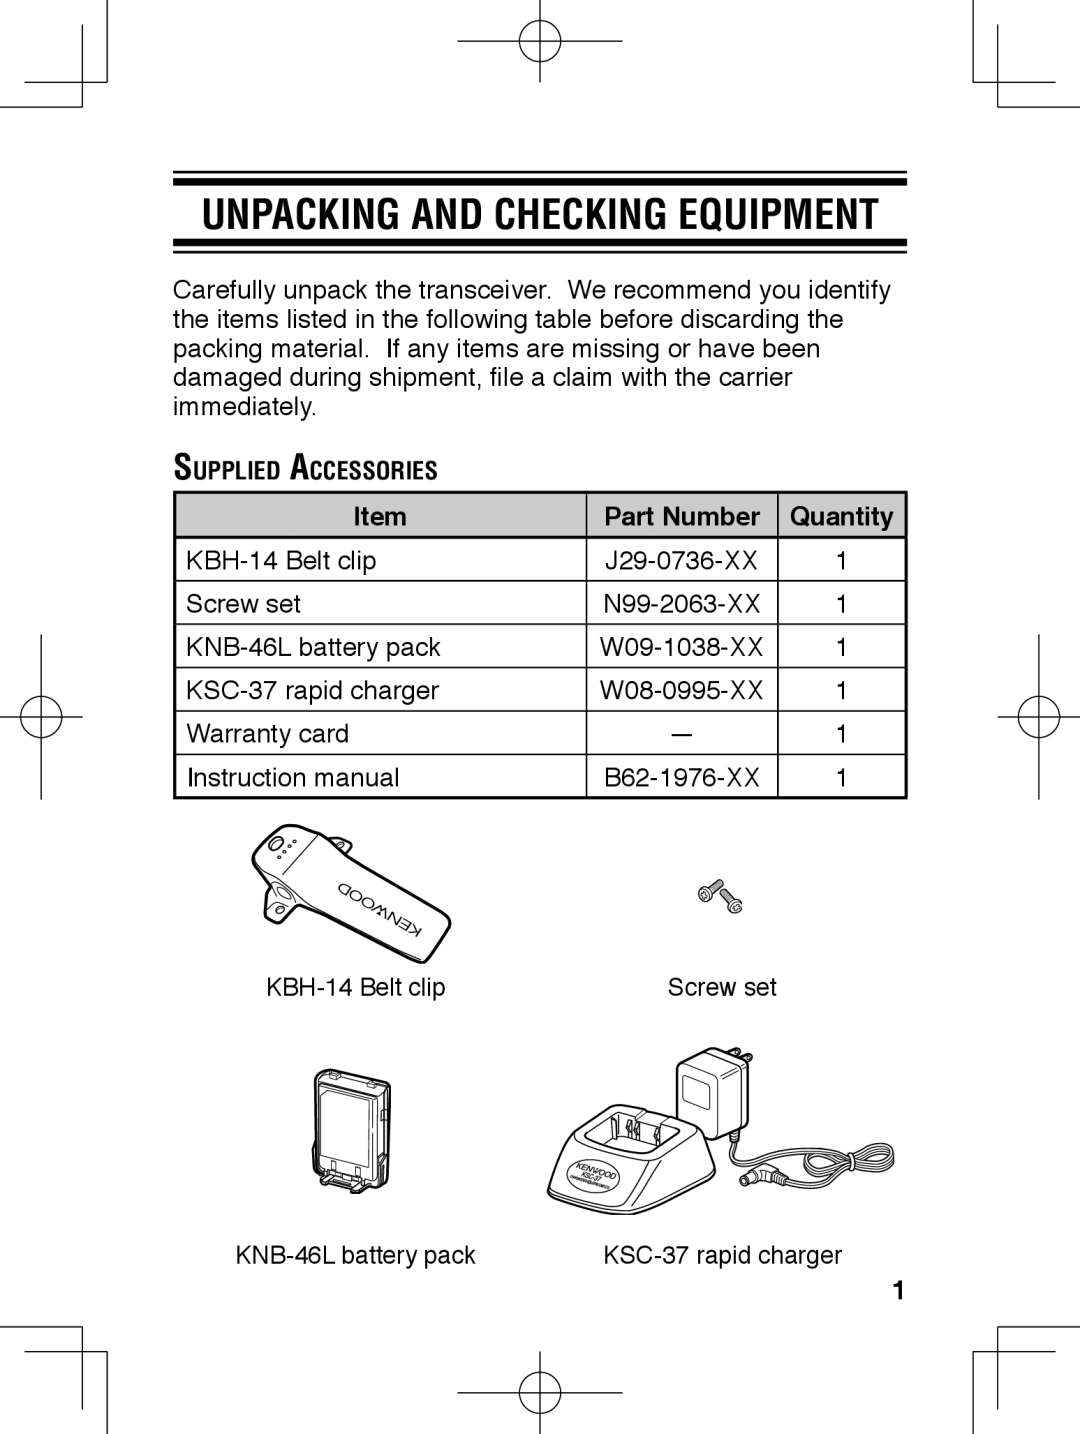 Kenwood TK-3230 instruction manual Unpacking and Checking Equipment, Item, Part Number, Quantity 